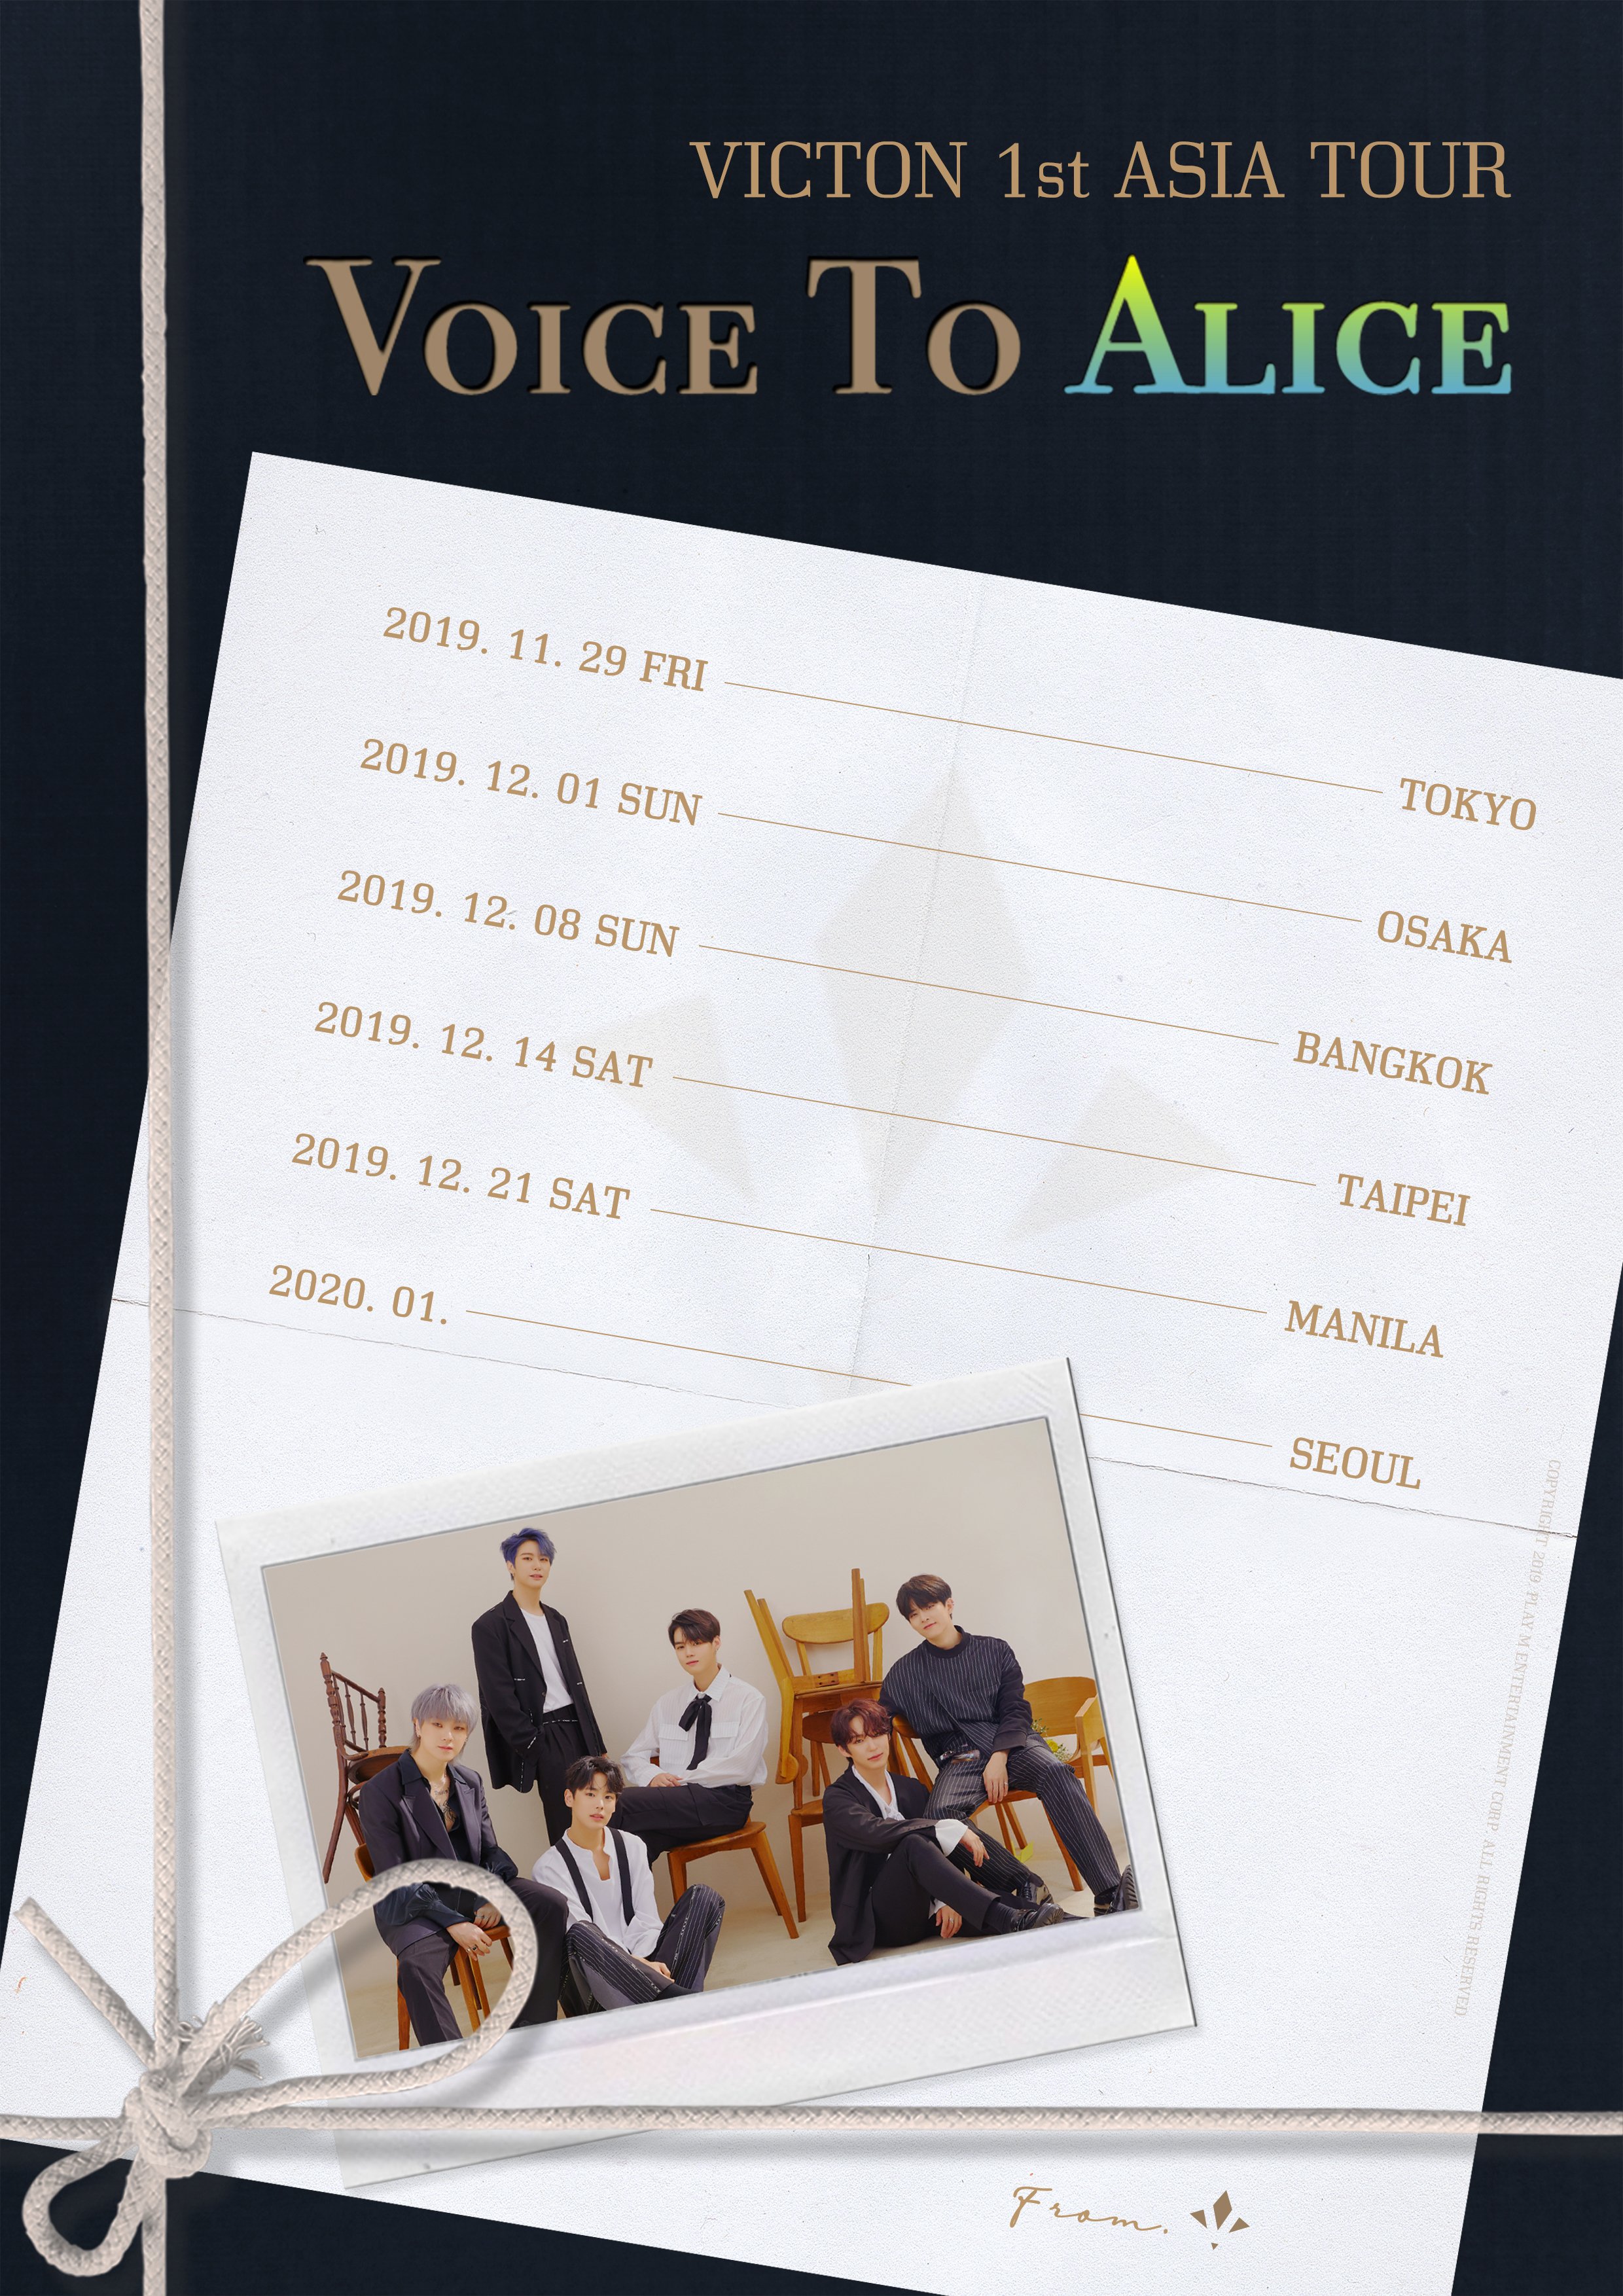 VICTON 1st ASIA TOUR [VOICE TO ALICE]: Cities And Ticket Details | Kpopmap2480 x 3508